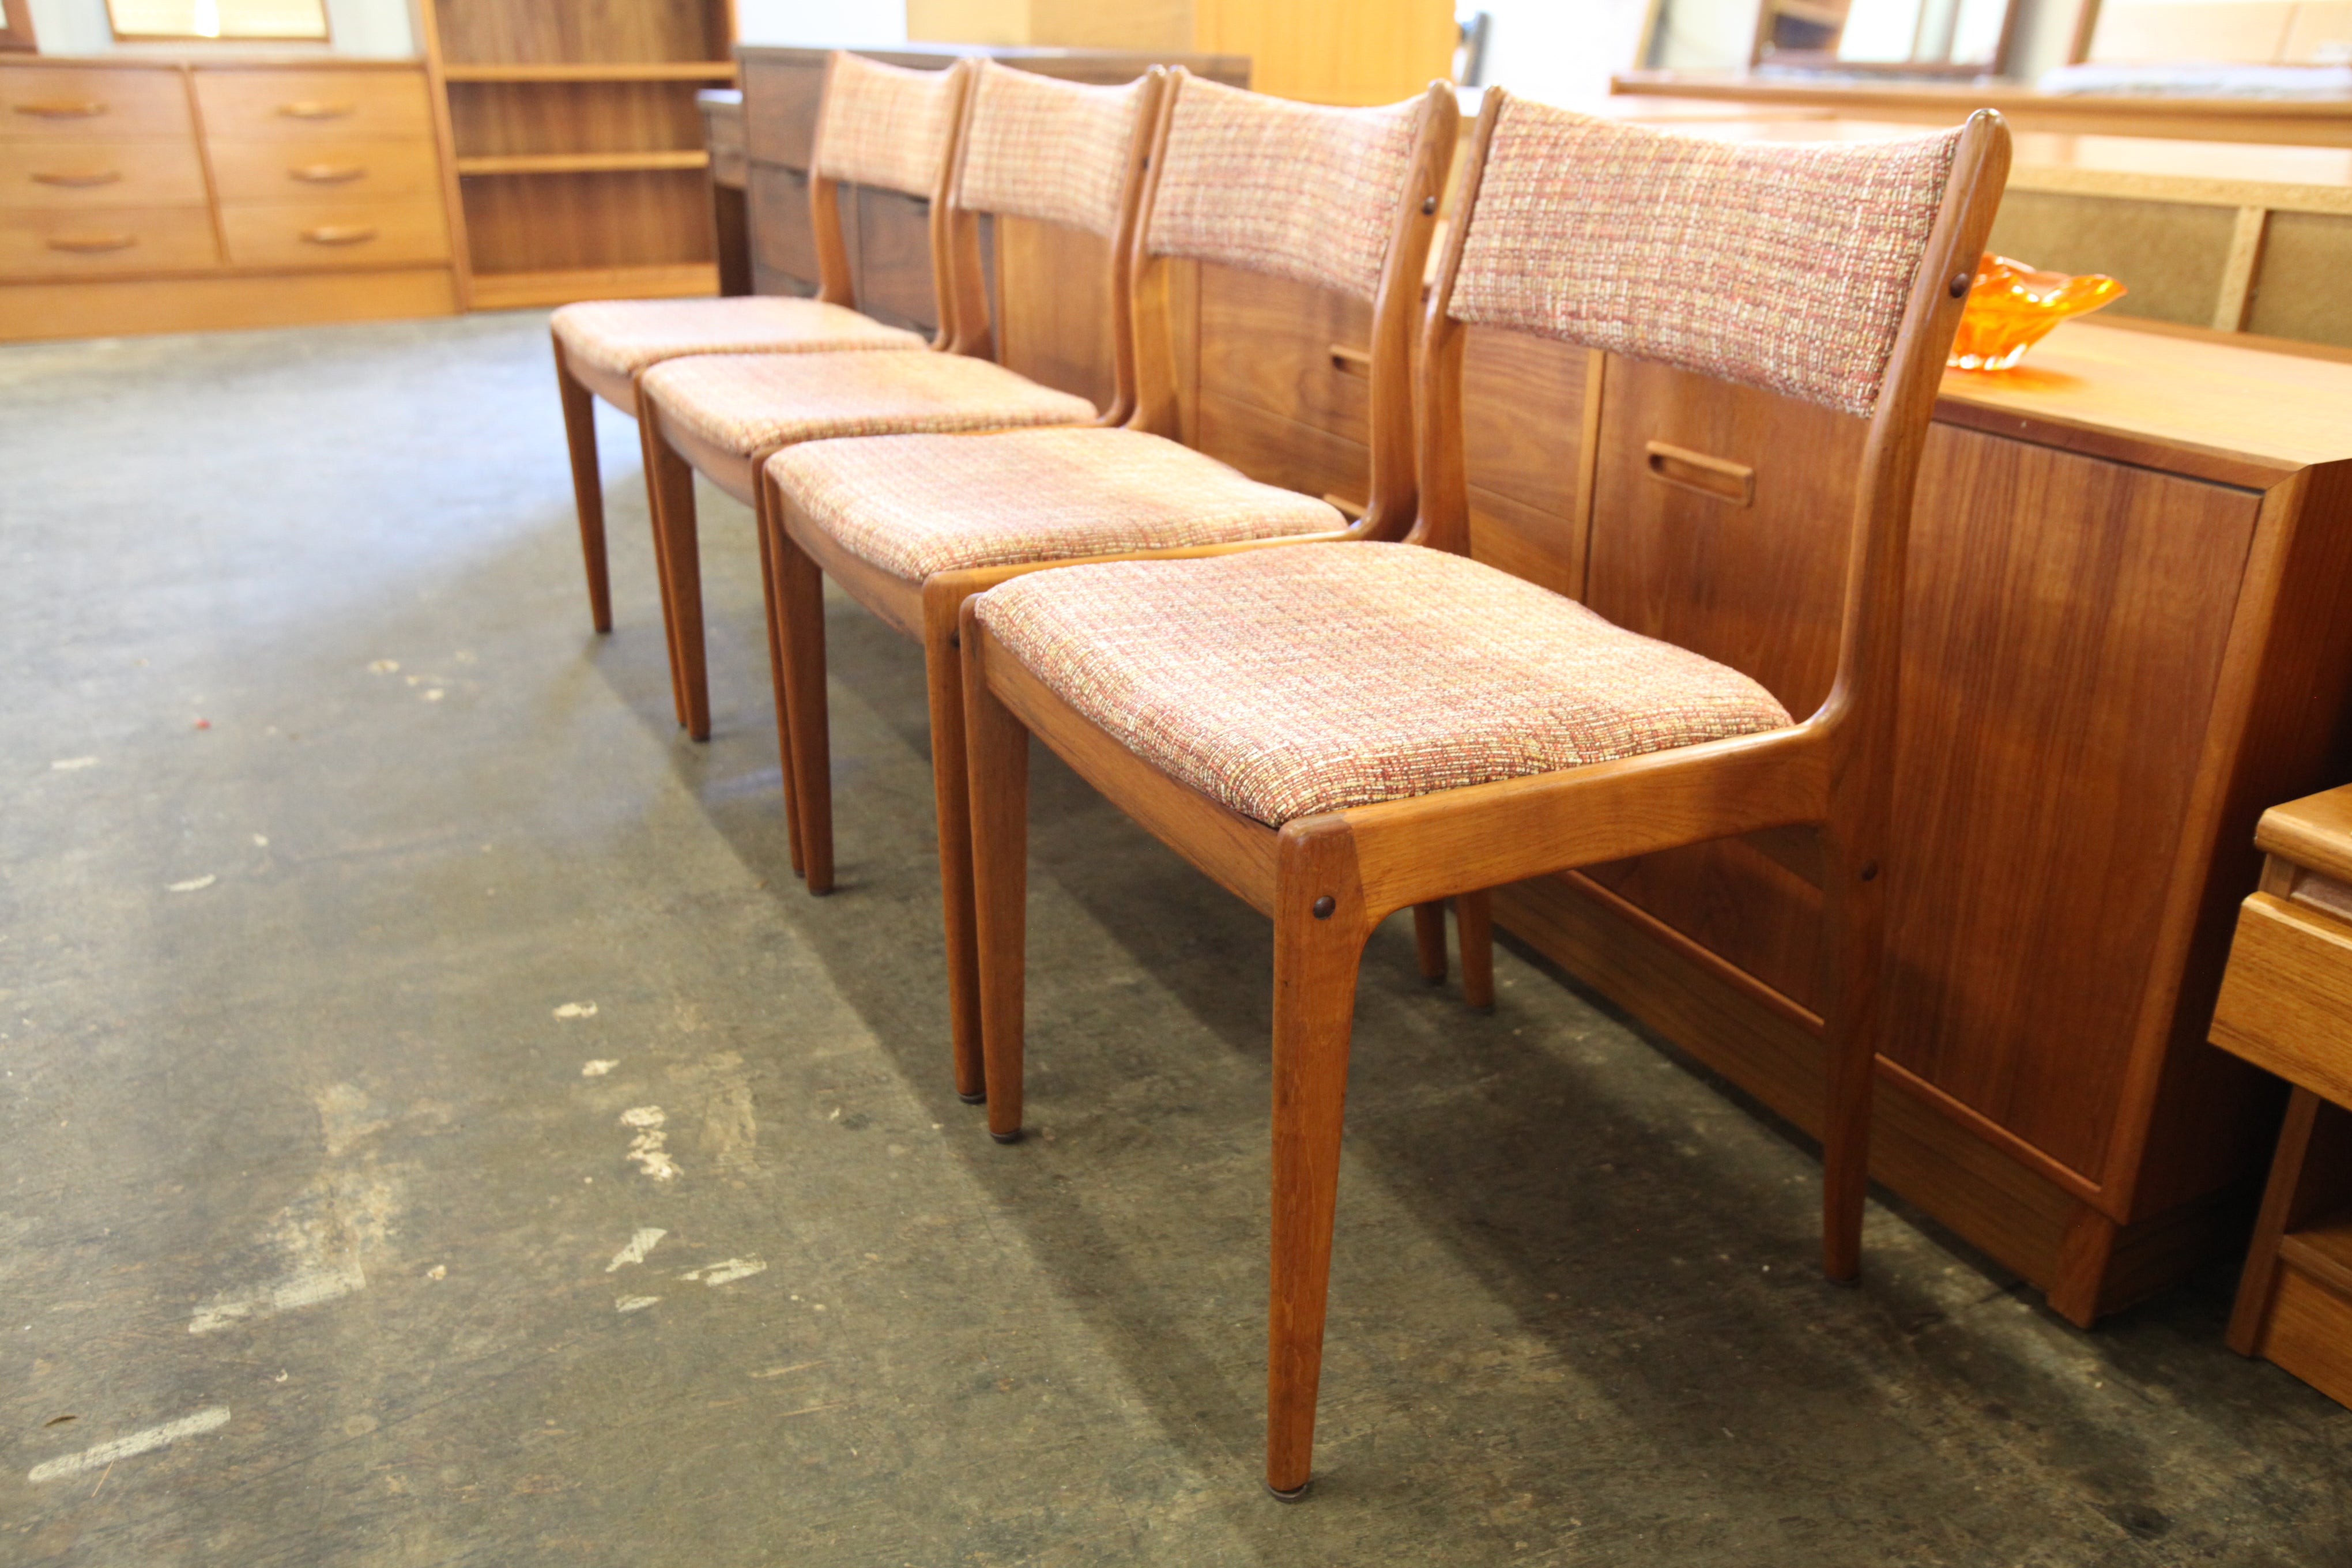 Set of 4 Vintage Teak Dining Chairs. (new fabric)